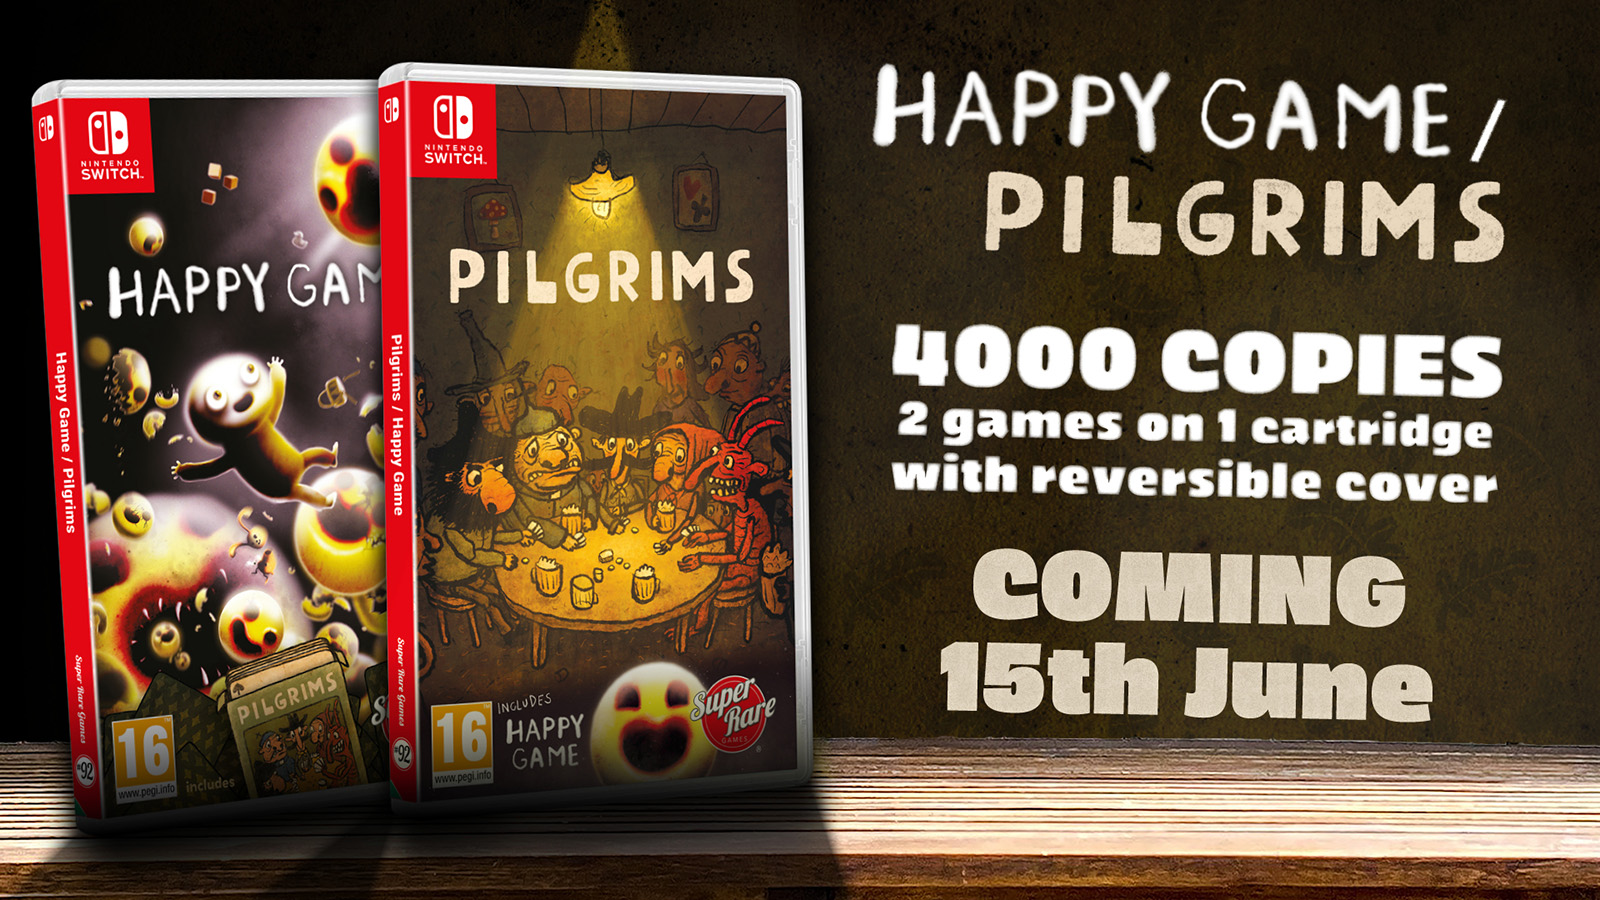 Happy Game And Pilgrims Gets Limited Physical Release For Nintendo Switch